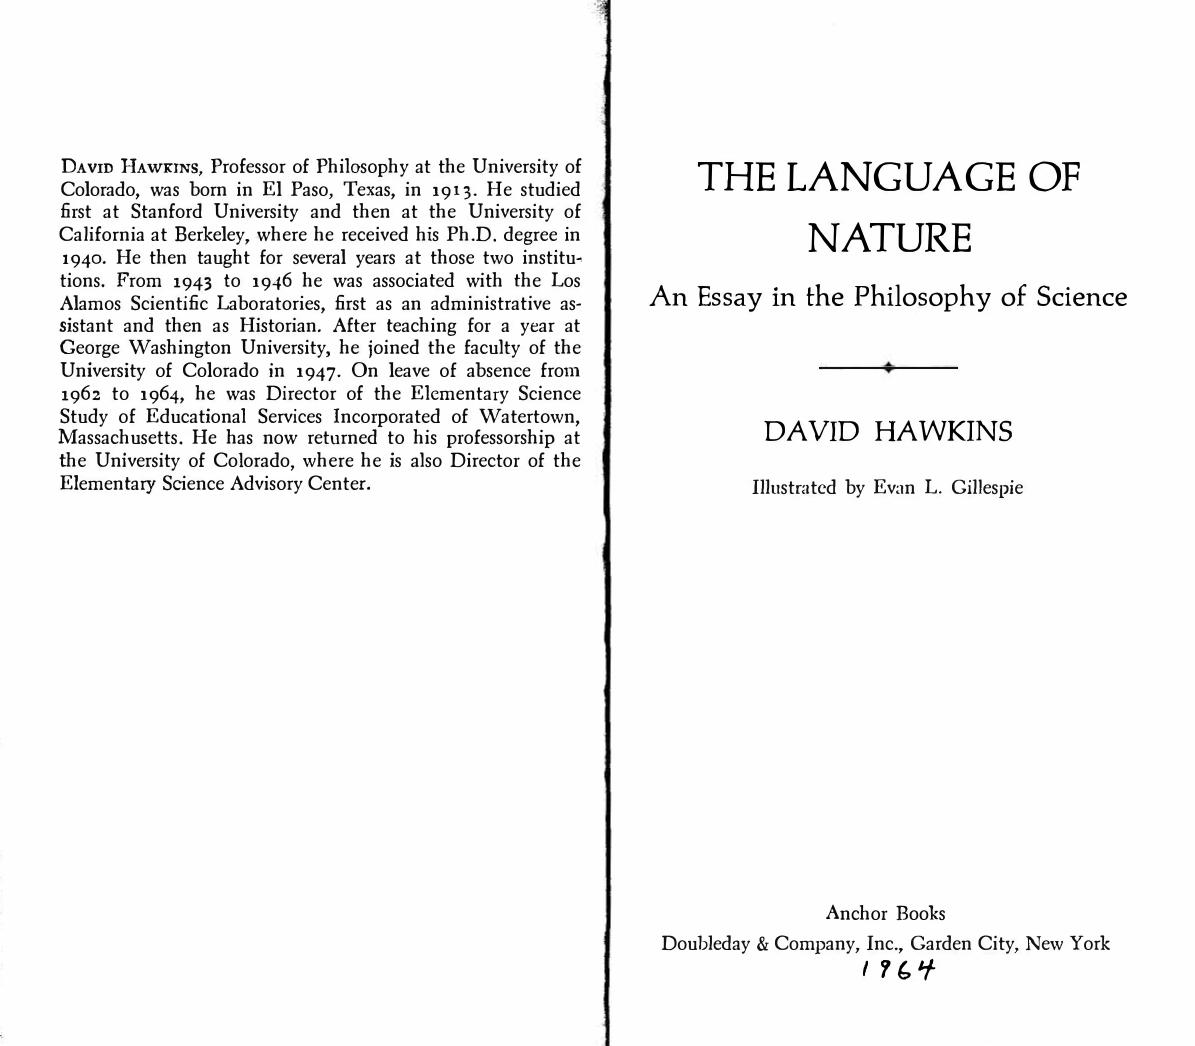 The Language of Nature: An Essay in the Philosophy of Science